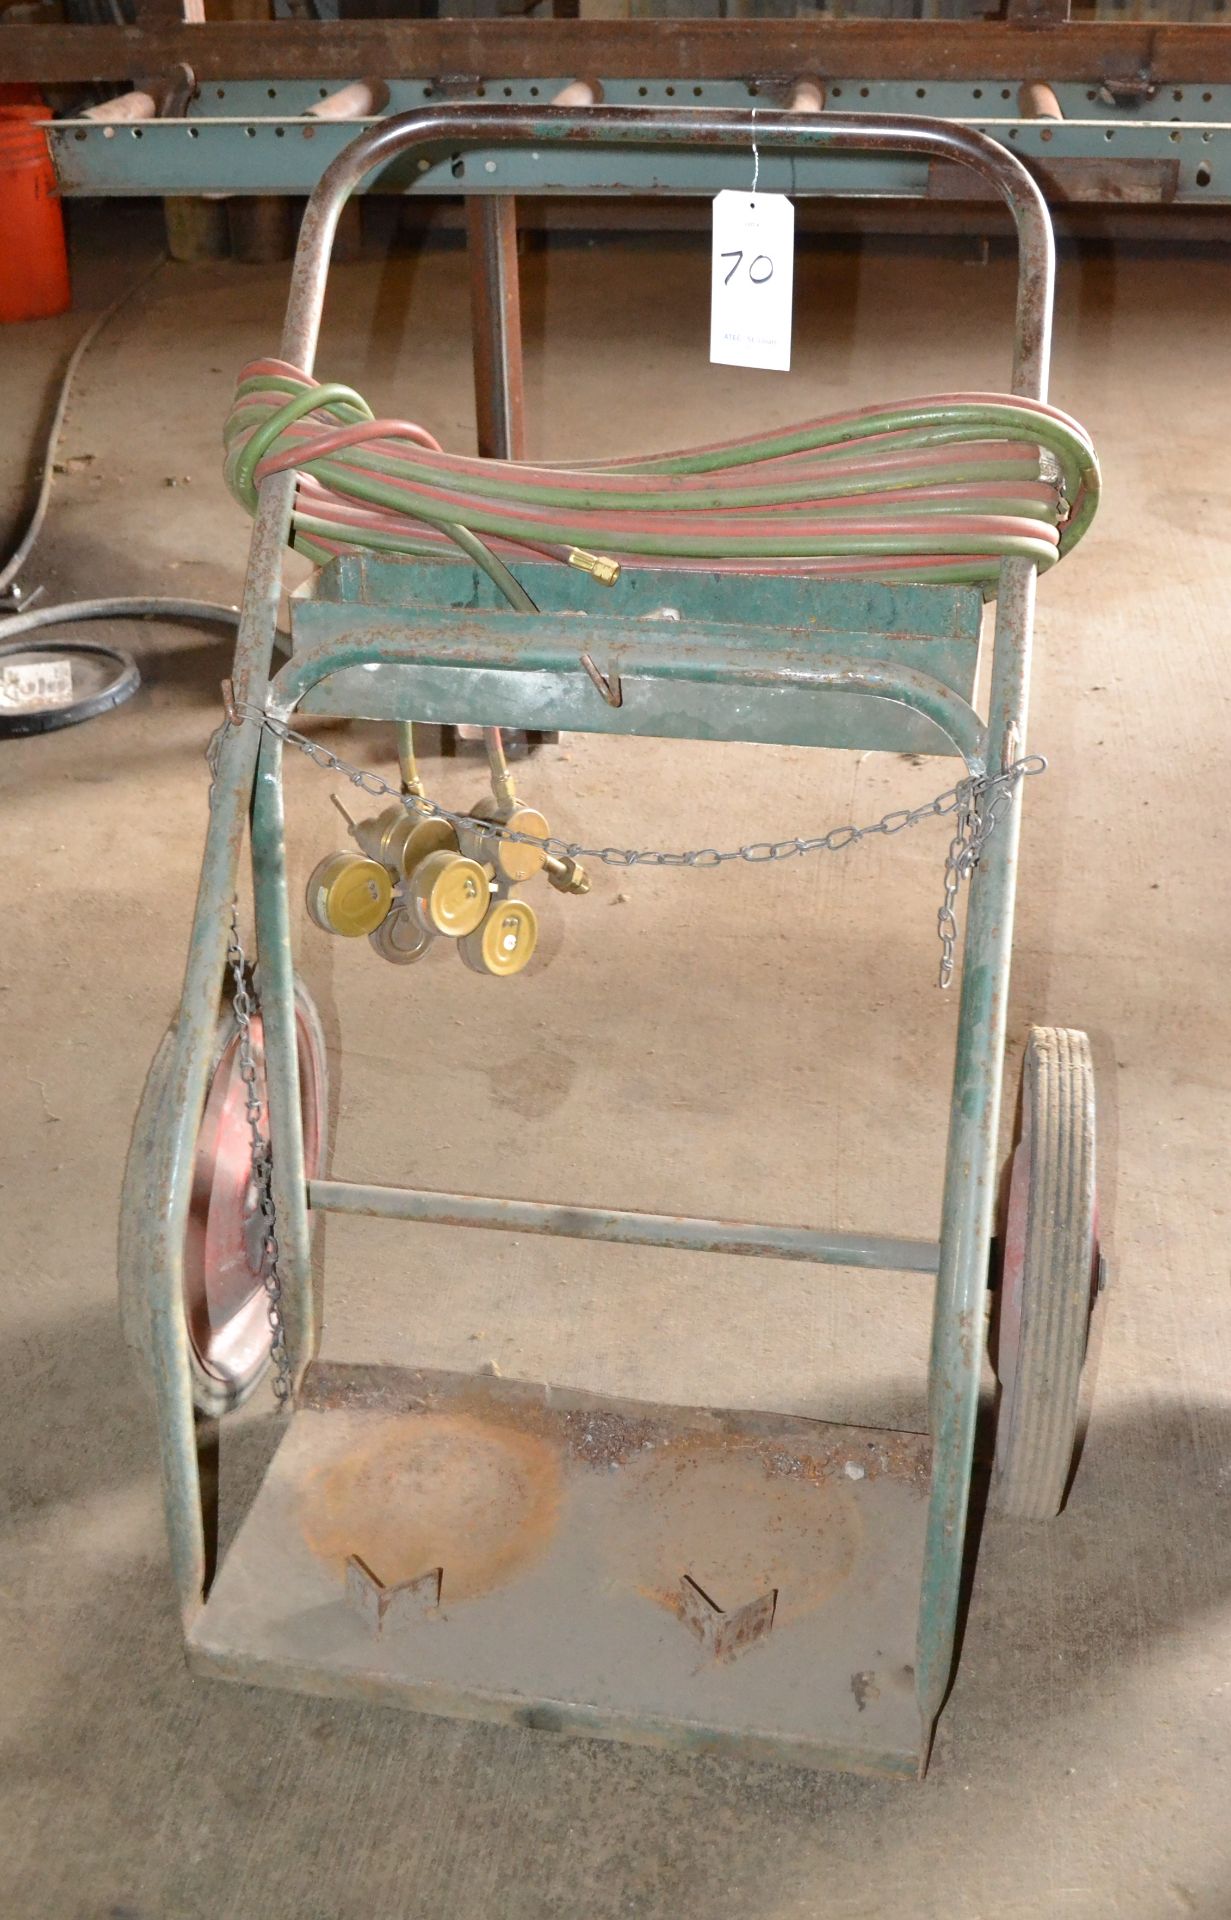 Lot Consisting of (2) Welding Carts With Hoses & Gauges - Image 3 of 5